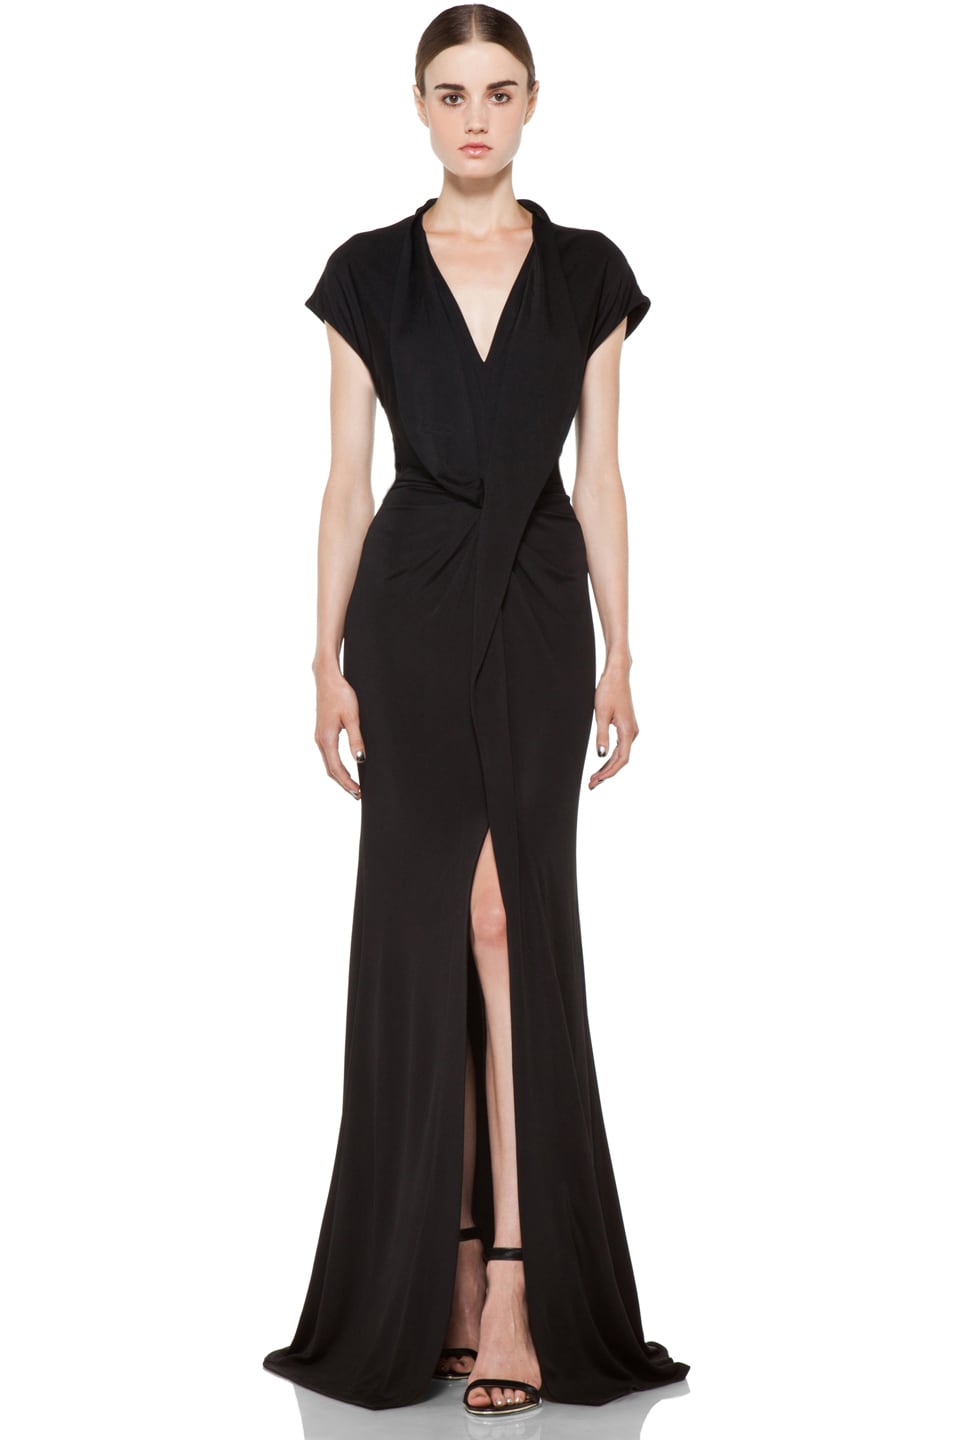 Givenchy Viscose Gown with Slit in Black | FWRD